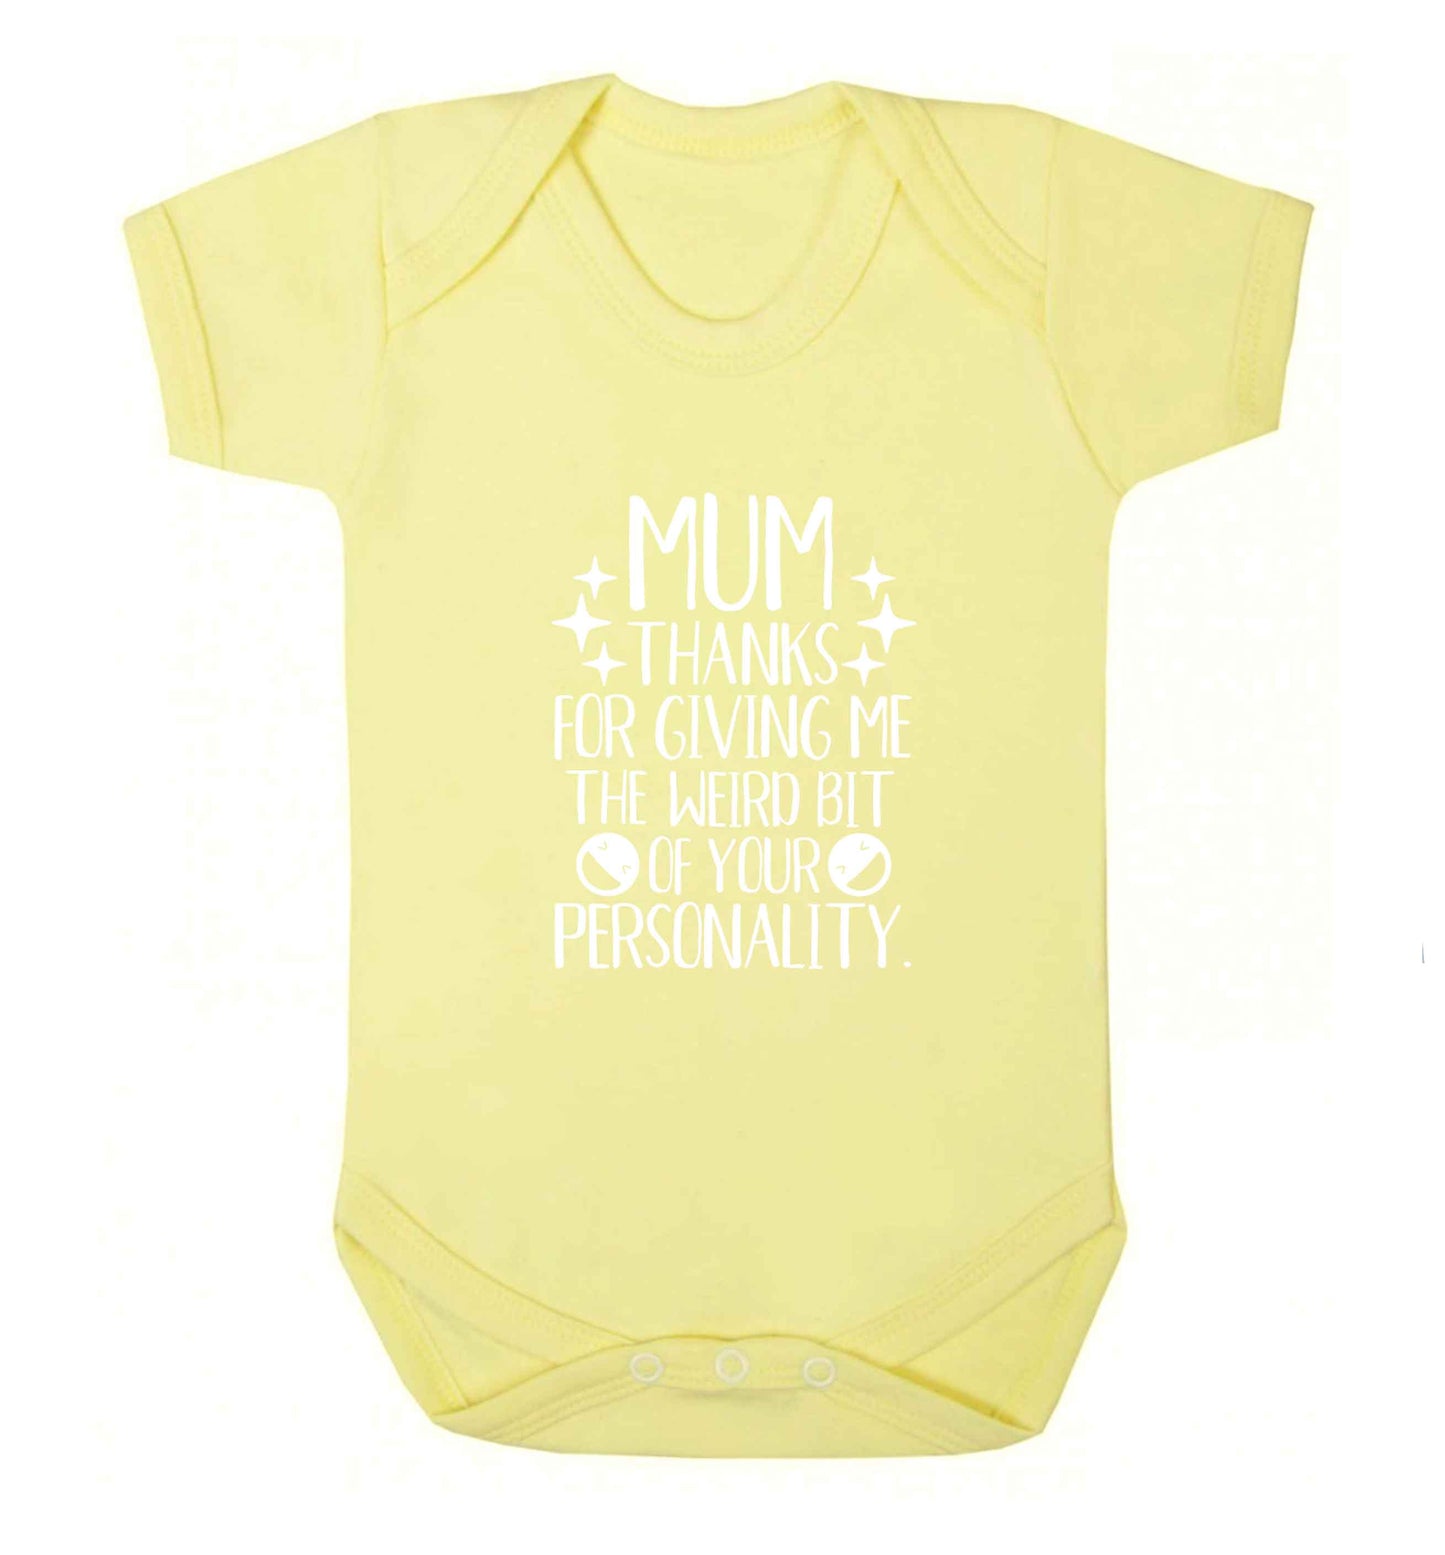 Mum, I love you more than halloumi and if you know me at all you know how deep that is baby vest pale yellow 18-24 months